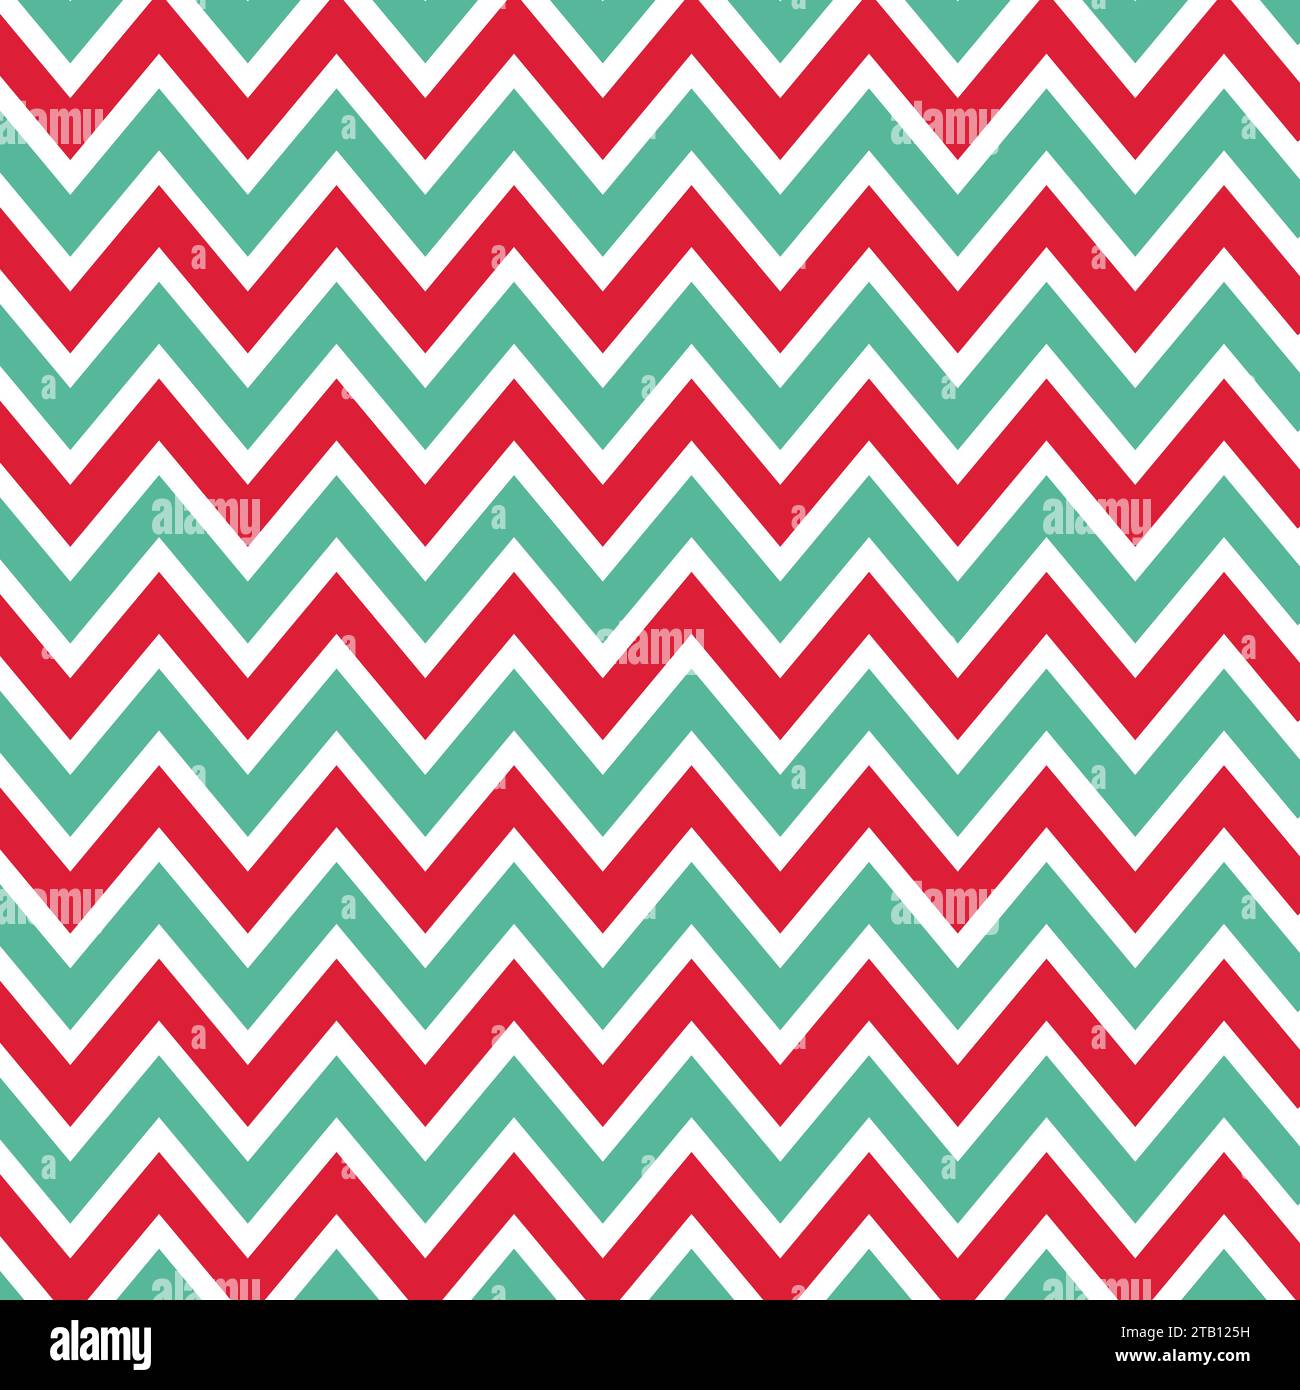 Christmas pattern chevron design wallpaper. Red, green and beige color zigzag pattern. Stock Vector